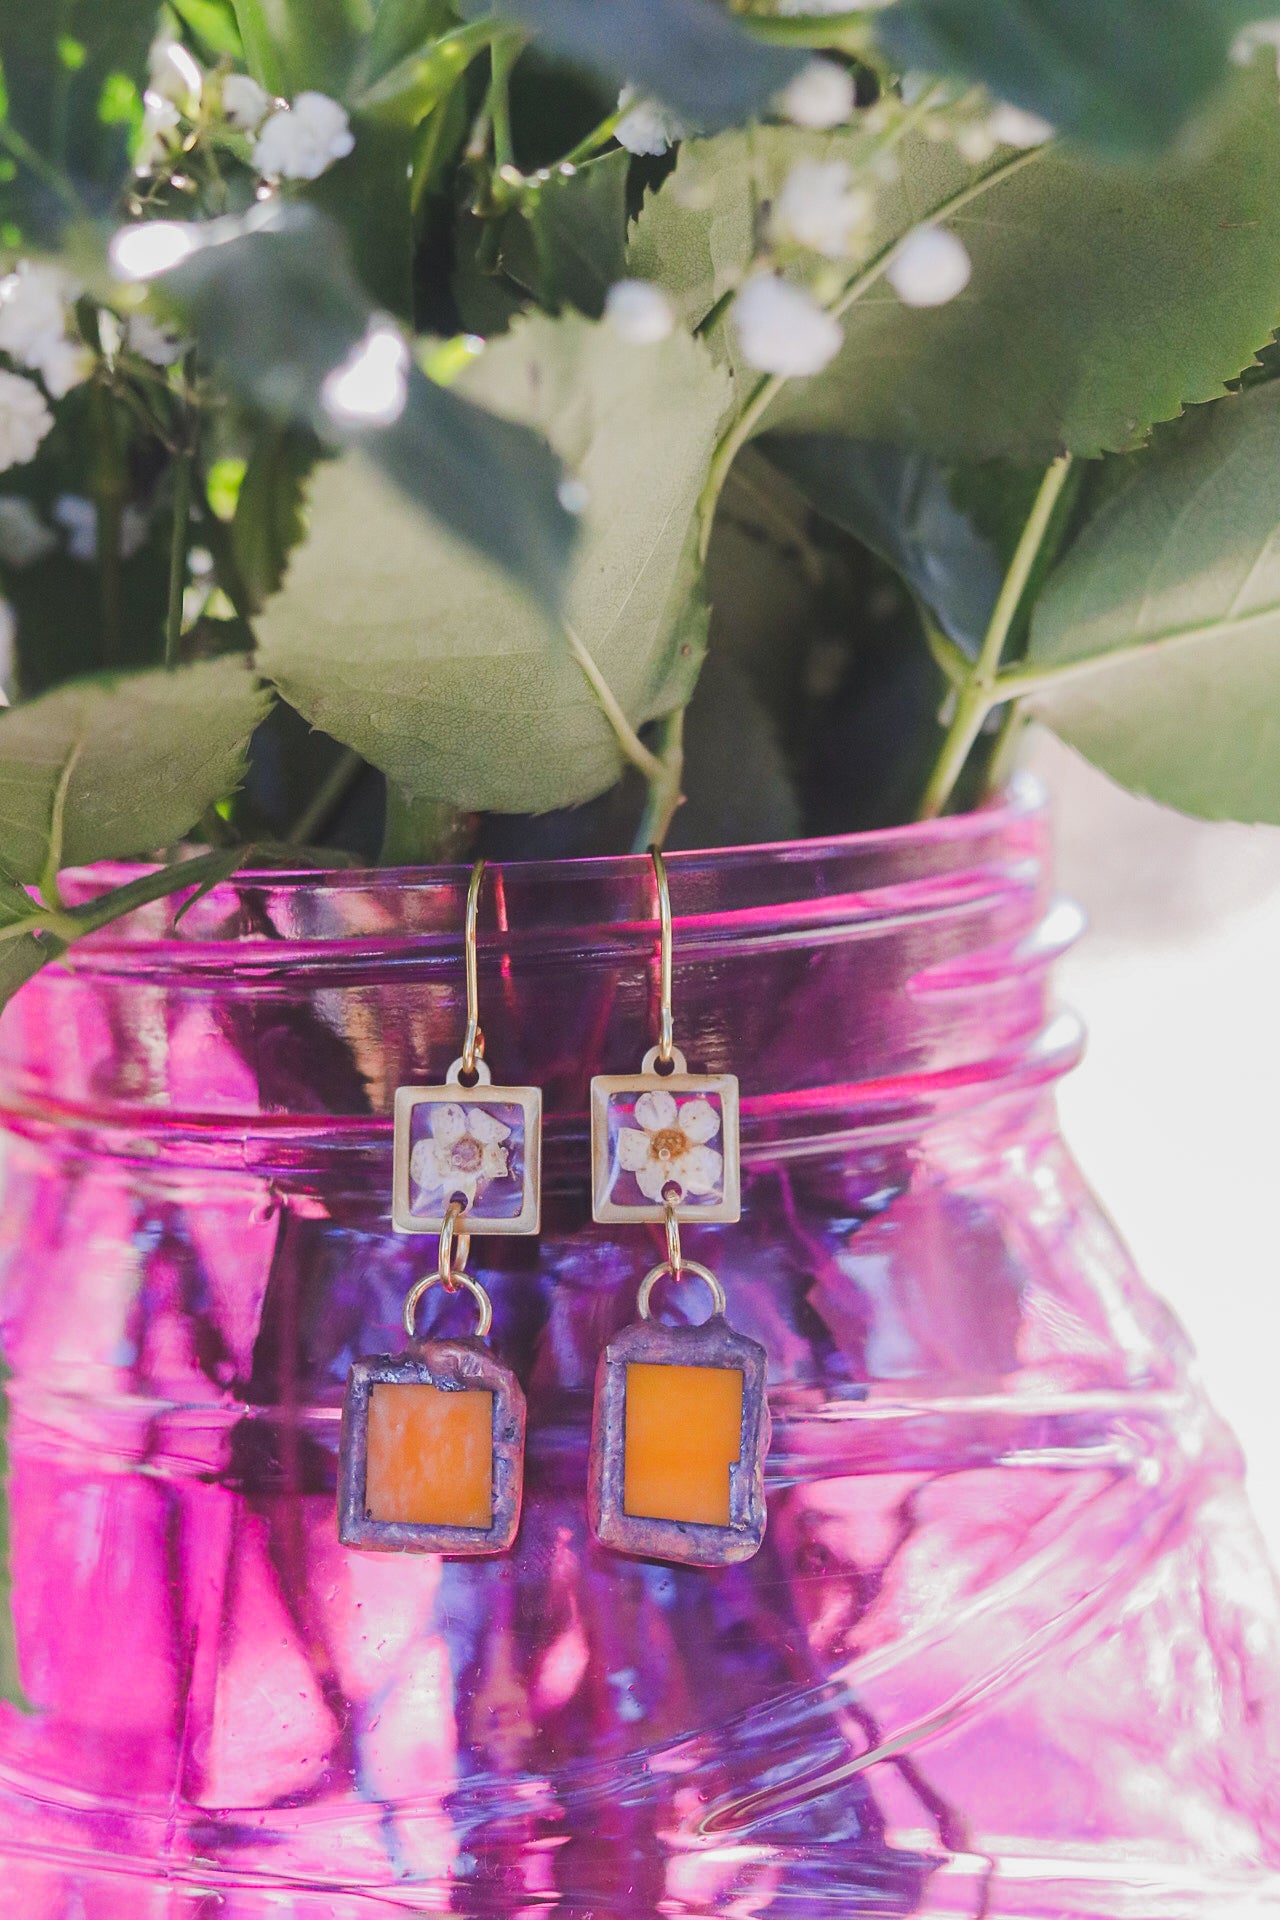 Botanical Beauty: Handmade Stained Glass Earrings by Magnolias Studios